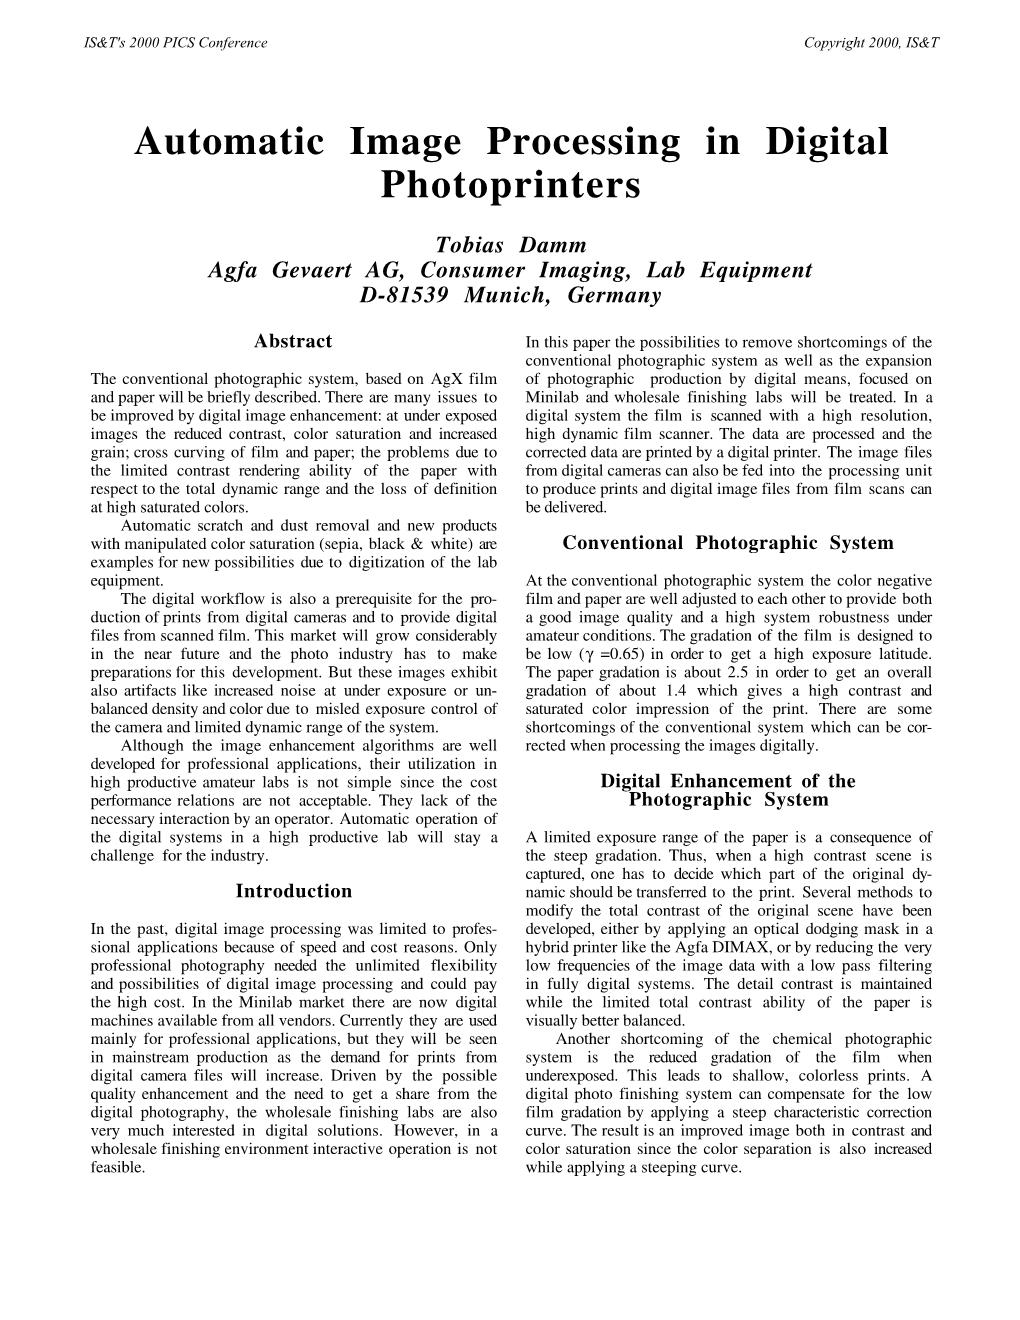 Automatic Image Processing in Digital Photoprinters